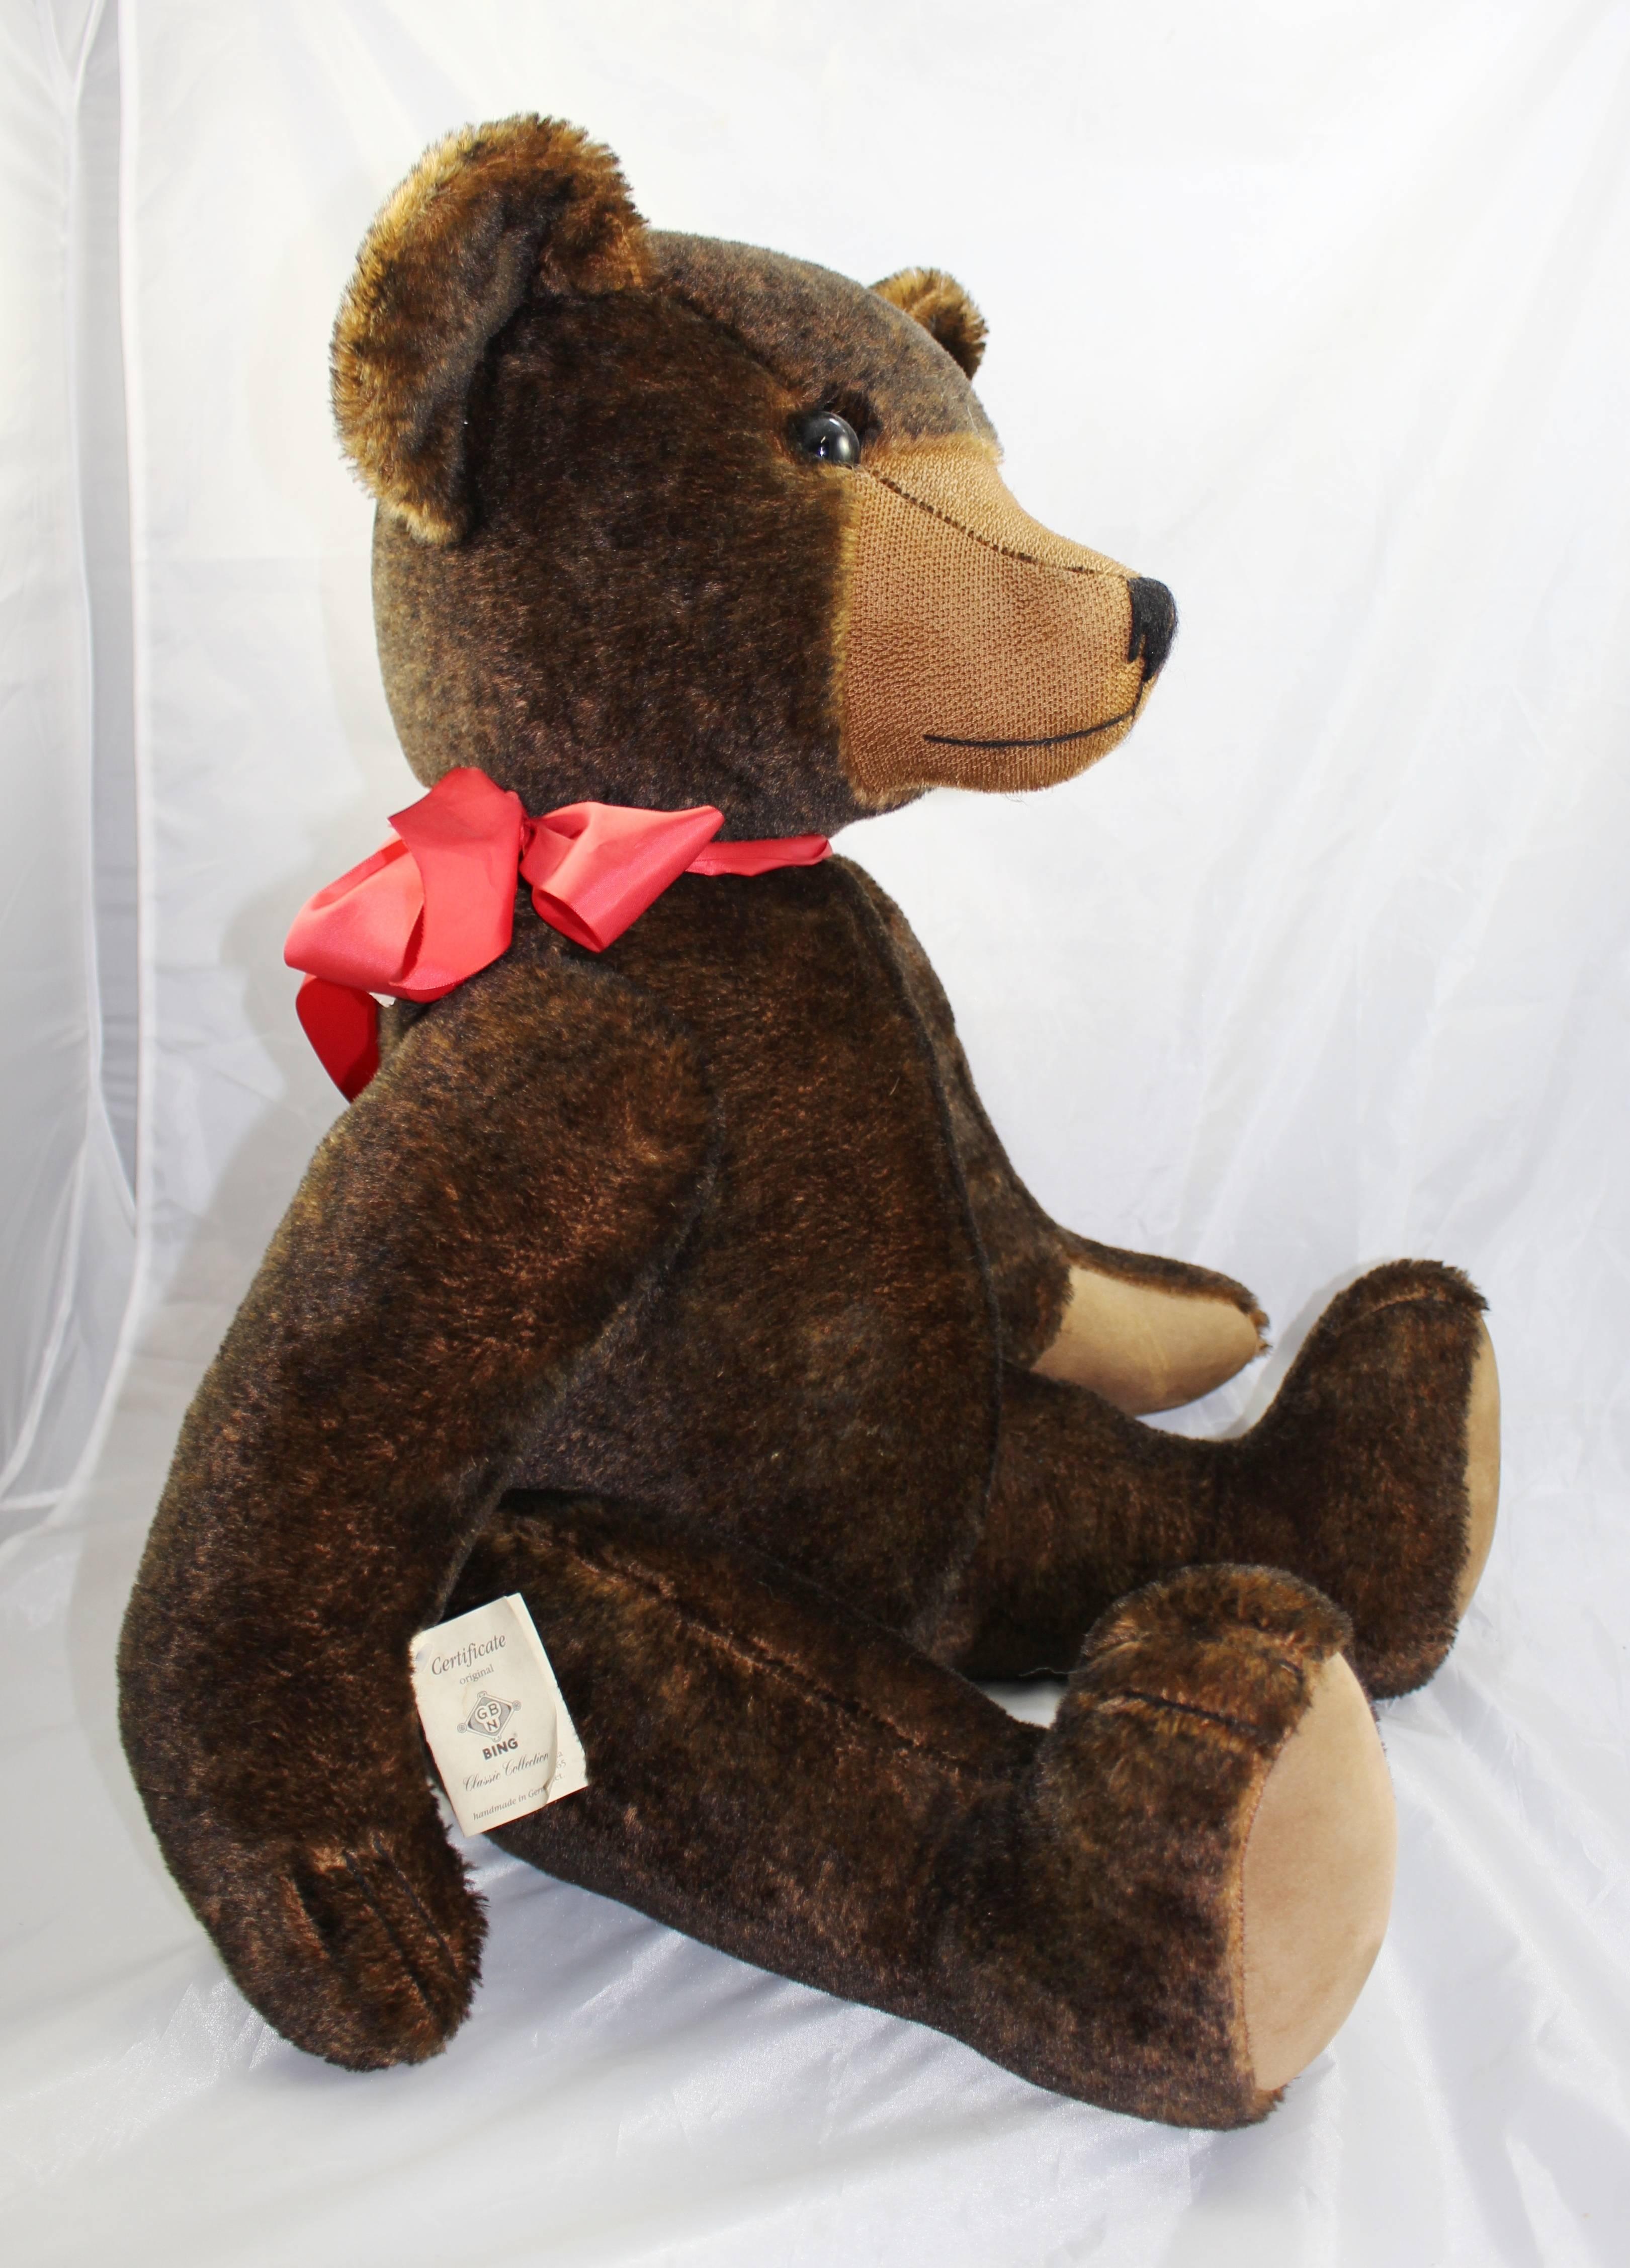 

Manufacturer Bing.
Origin, Germany.
Measures: Height 76 cm / 30 in.
Condition very good condition complete with certificate affixed to body.

Nice quality Bing growler bear.

Very clean bear from a private collection.

Please see other